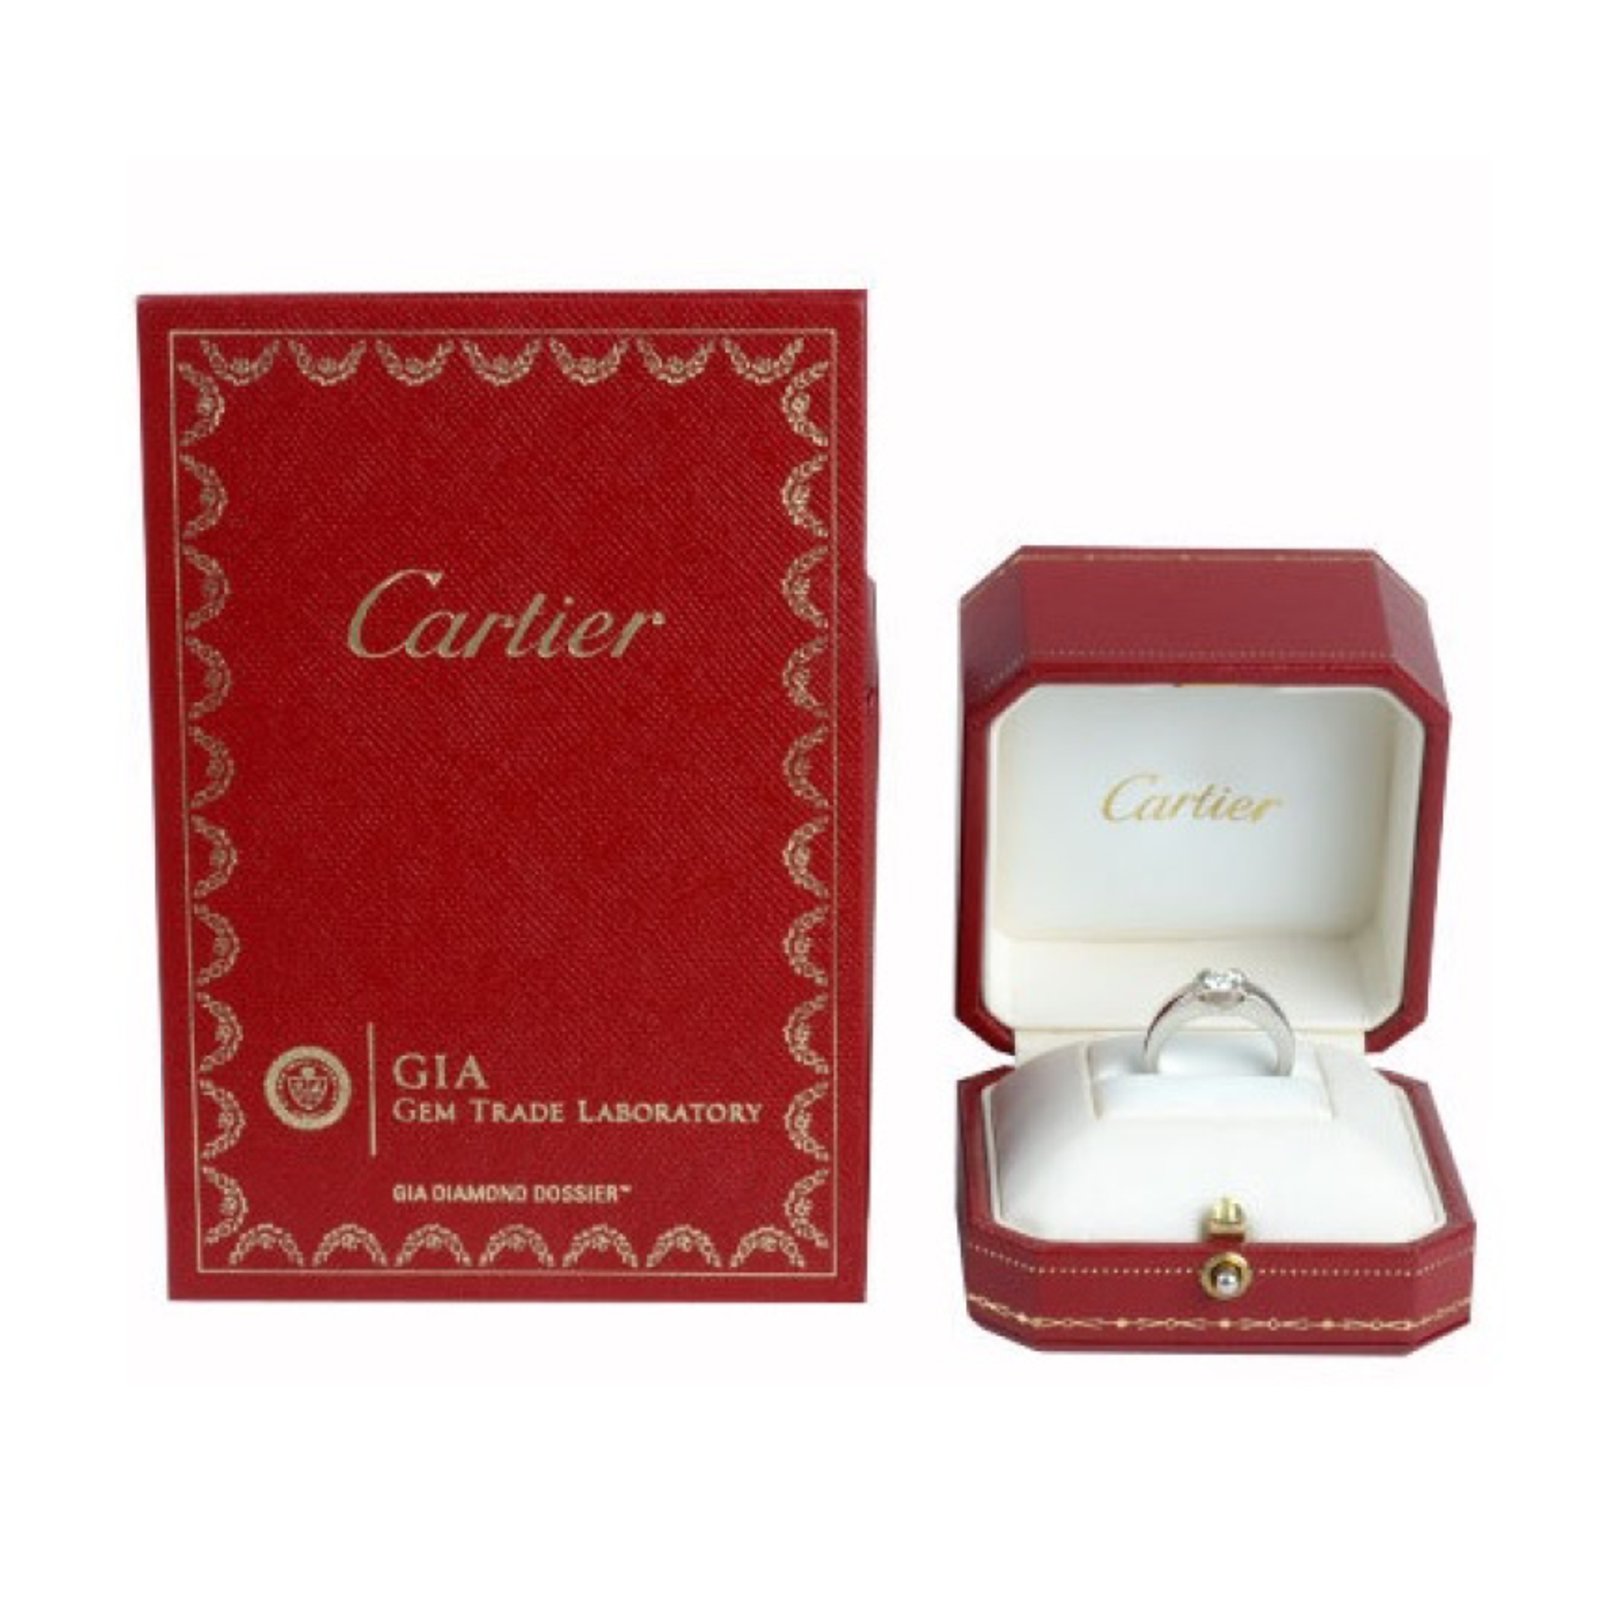 cartier ring trade in